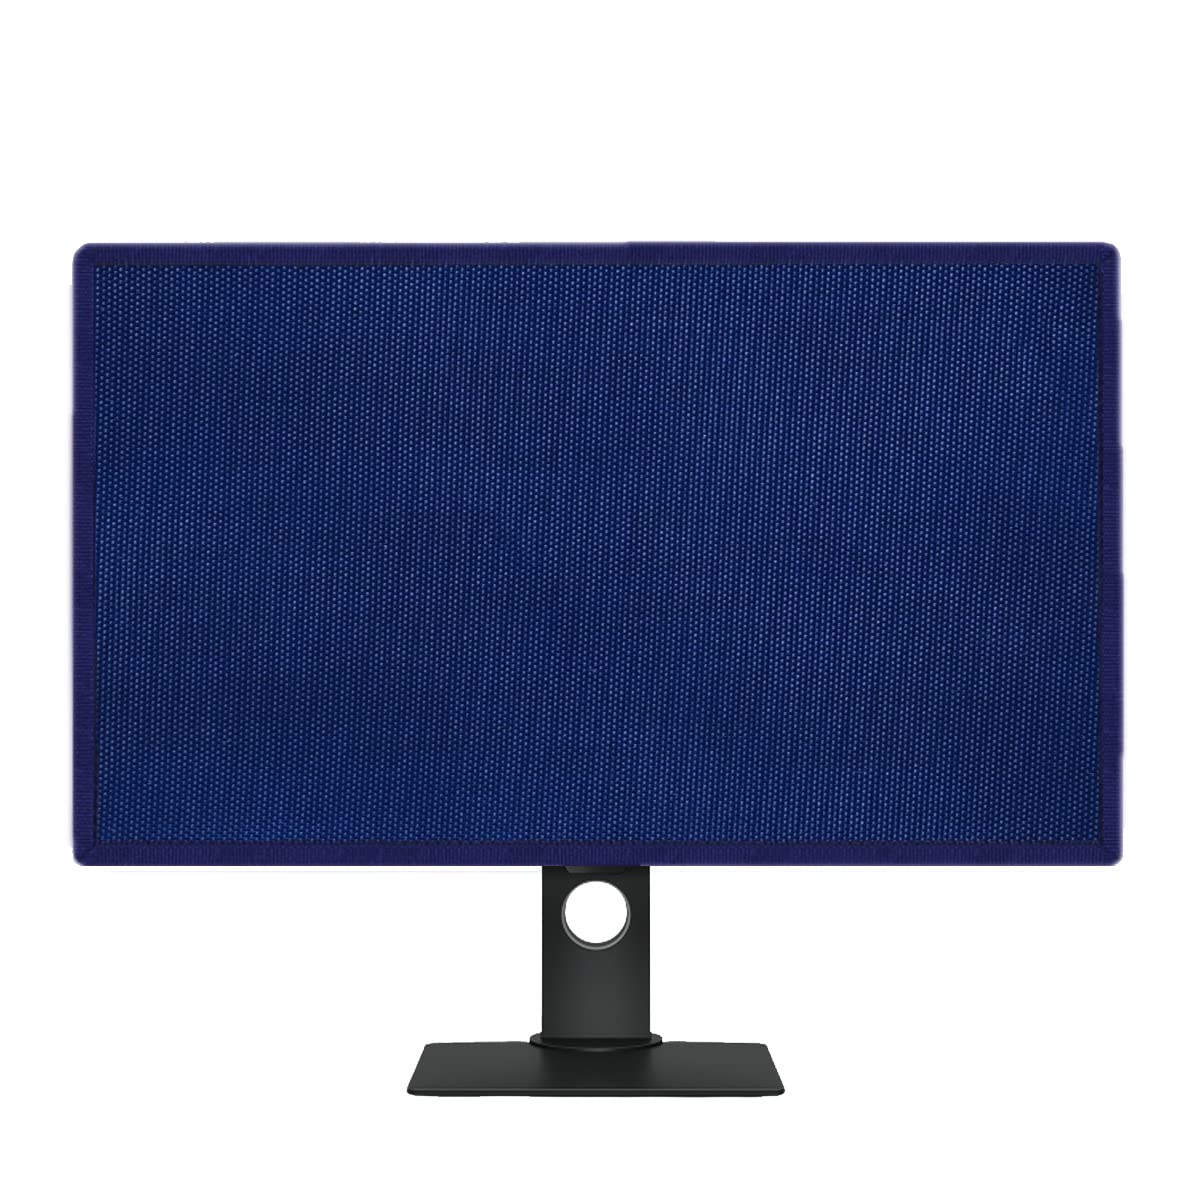 PalaP Dust Proof Monitor Cover for MSIOPTIX 27 inches Monitor